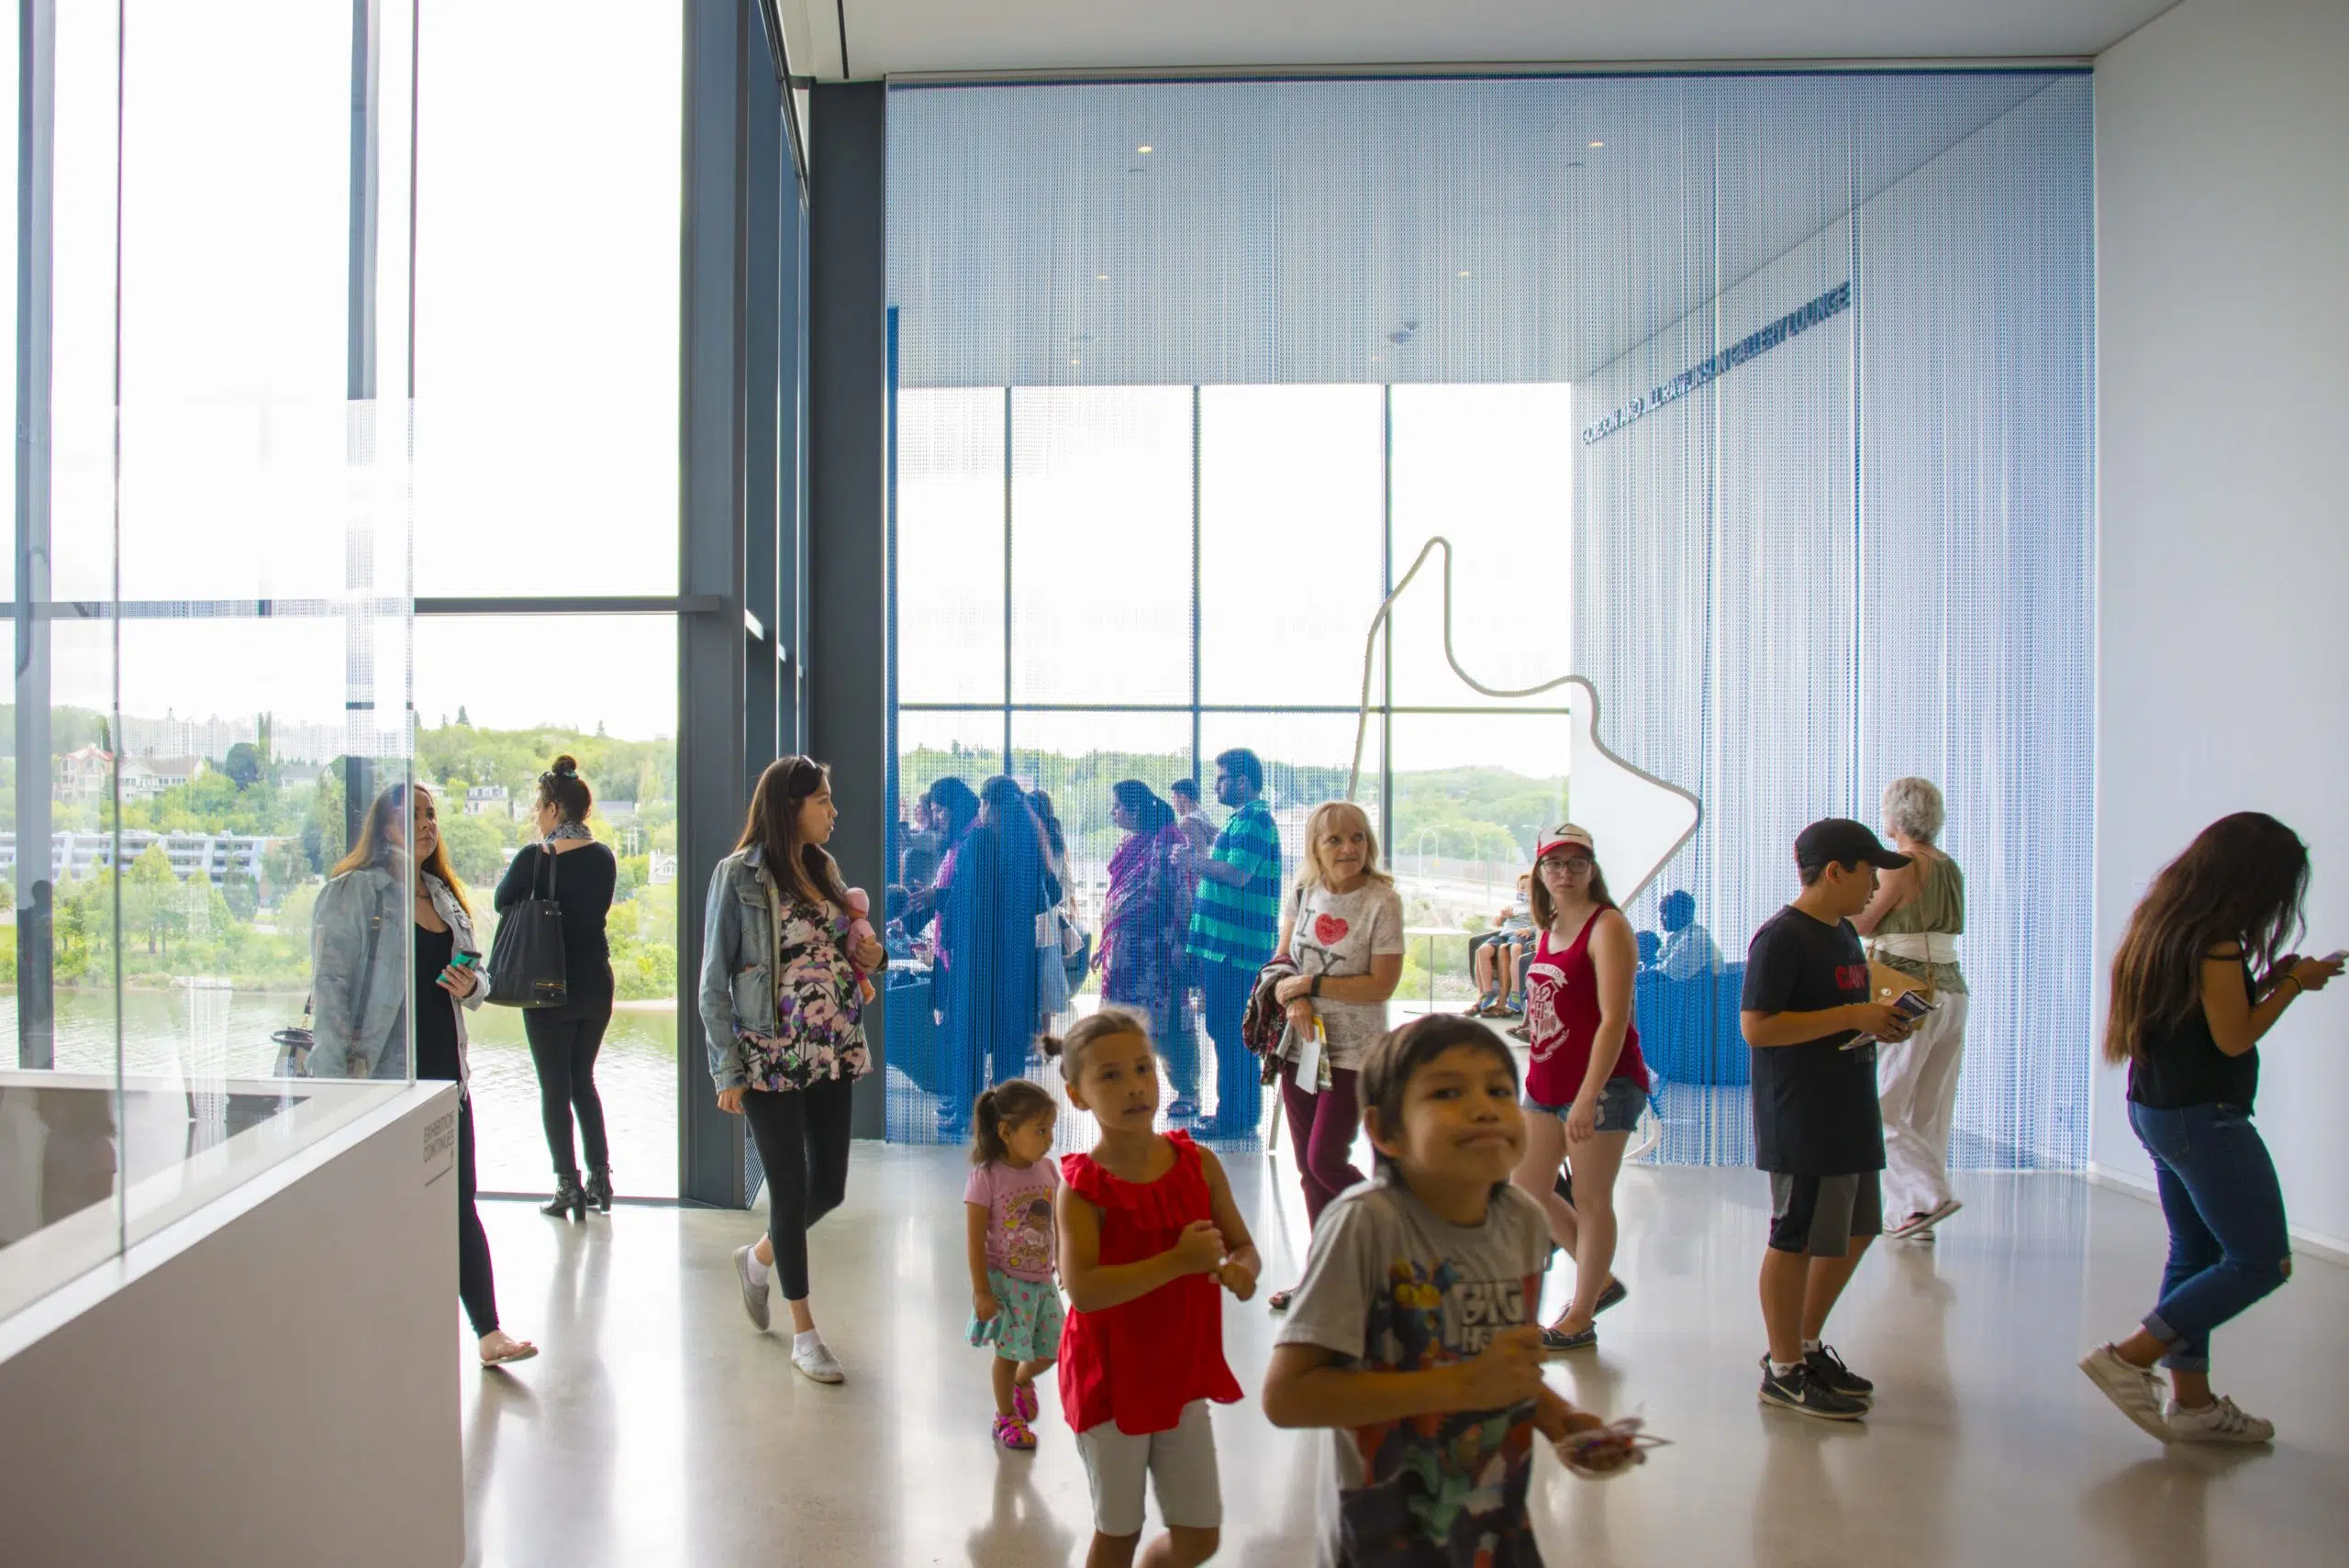 Rawlco Radio Welcomes over 2,900 Visitors to Free Admission Day at Remai Modern